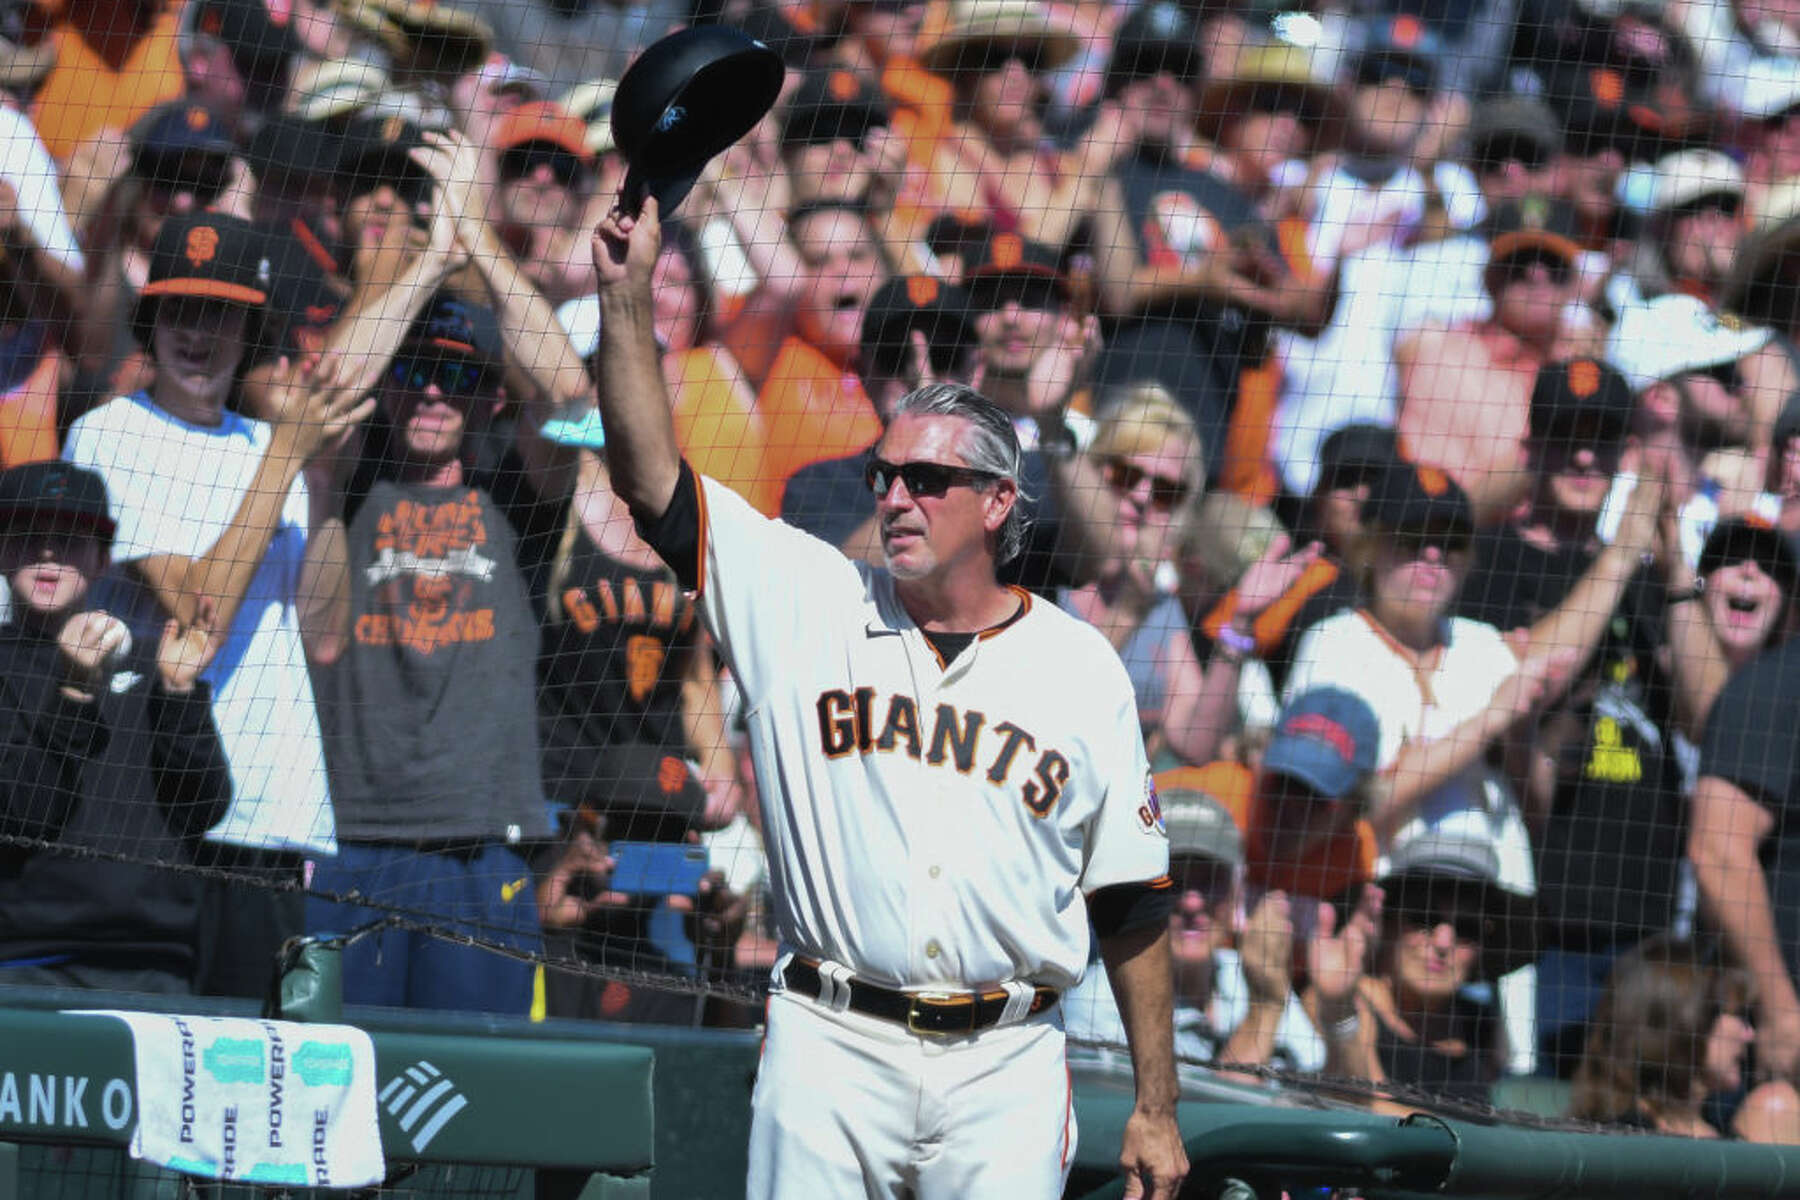 Giants longtime third base coach Ron Wotus lingers on field as Dodgers celebrate NLCS berth